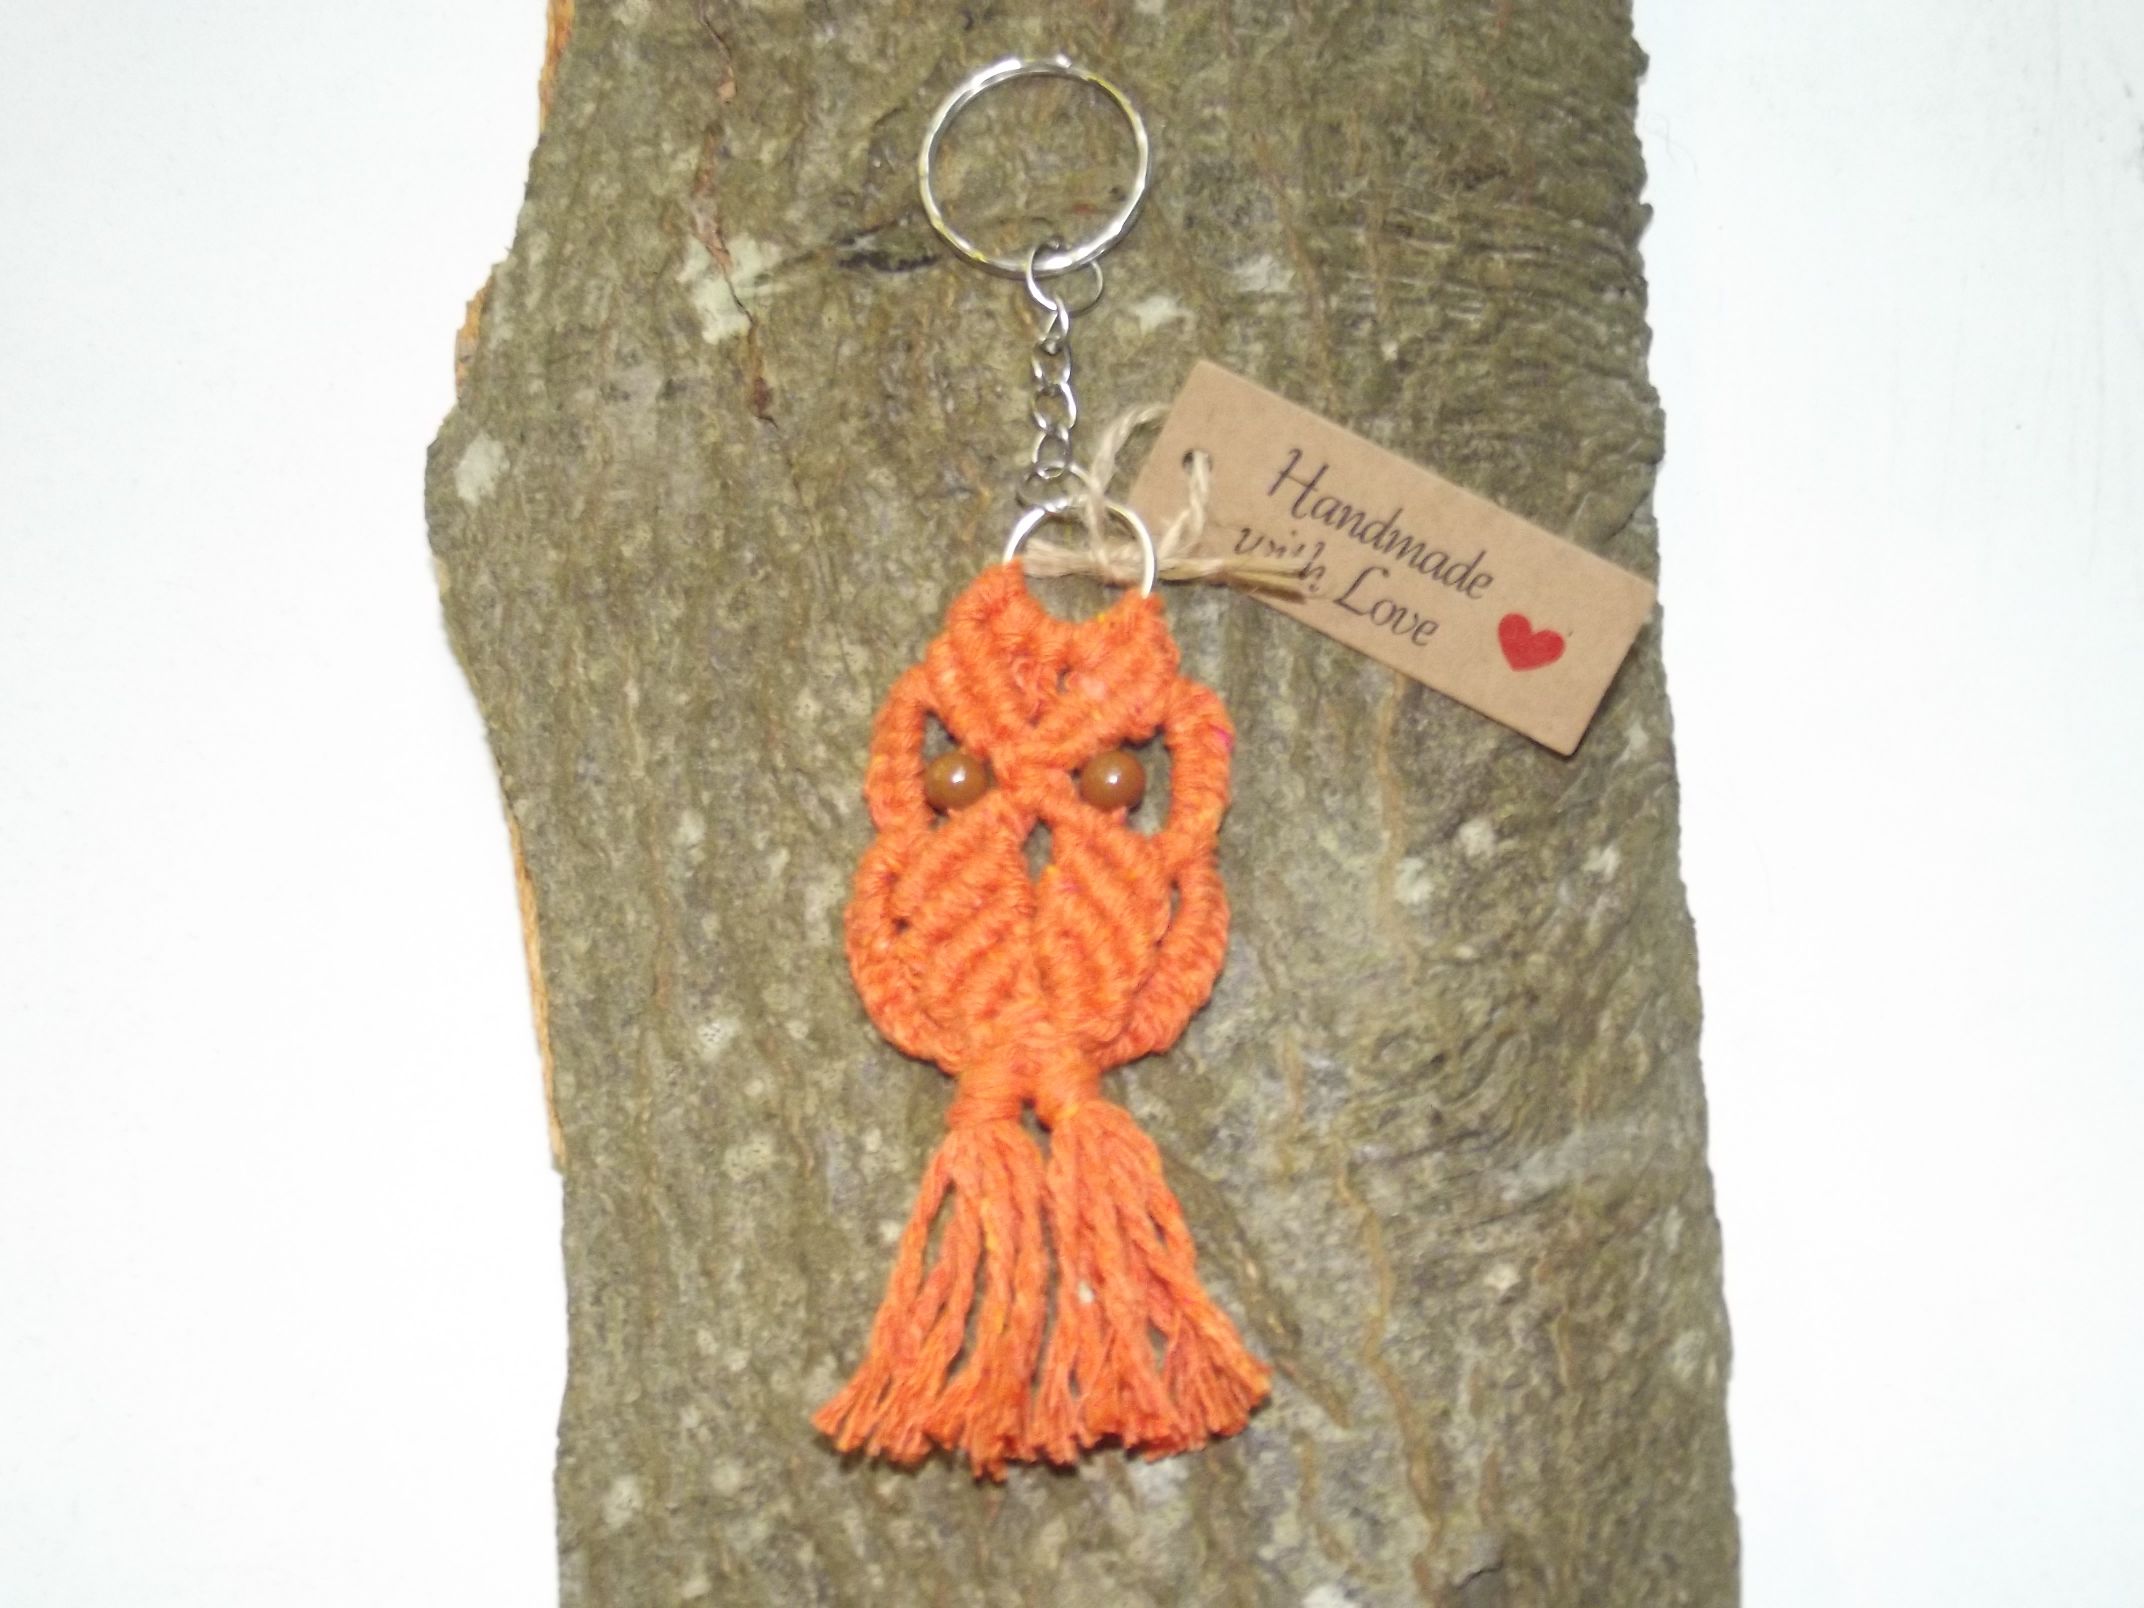 Handcrafted Macrame Owl Keyring Charm - Size 1 - 8-9cm - The Dropped Stitch